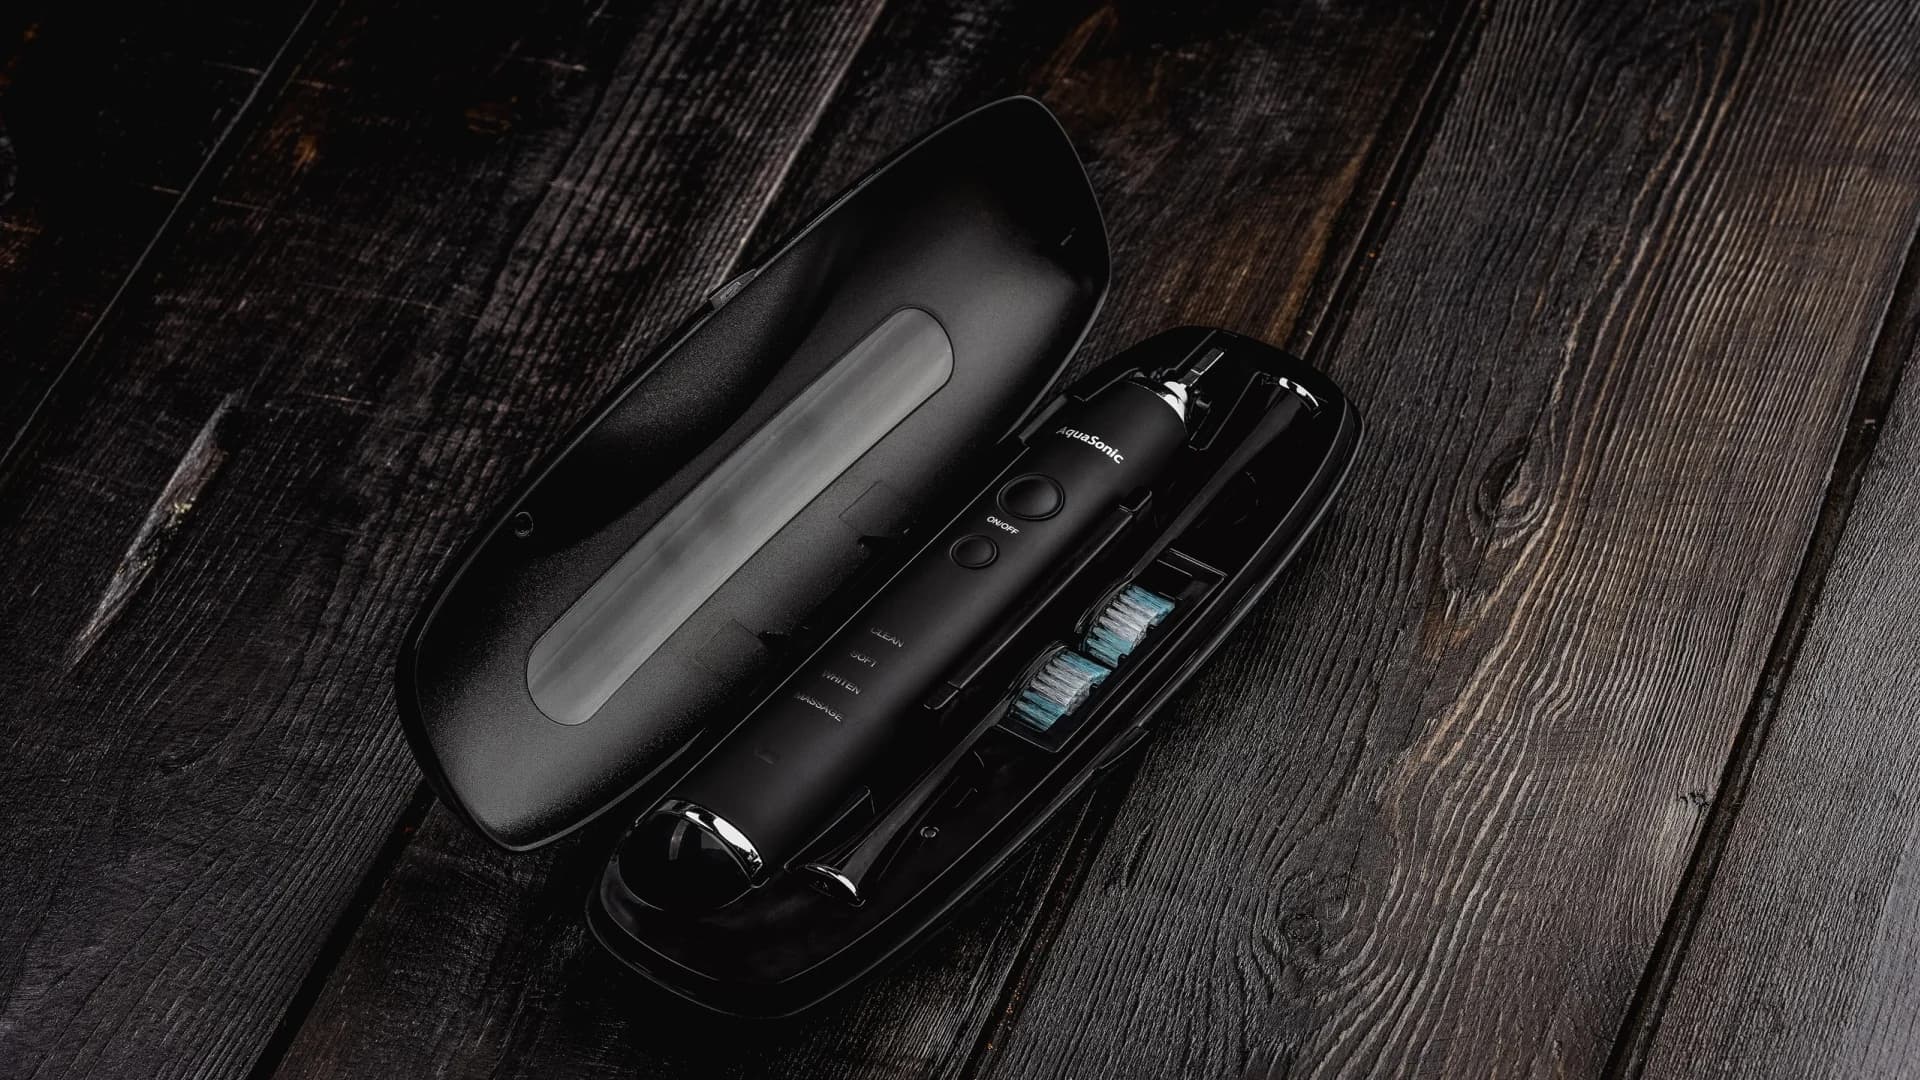 Pre-Black Friday: Save Over $100 On This Electric Toothbrush Set 